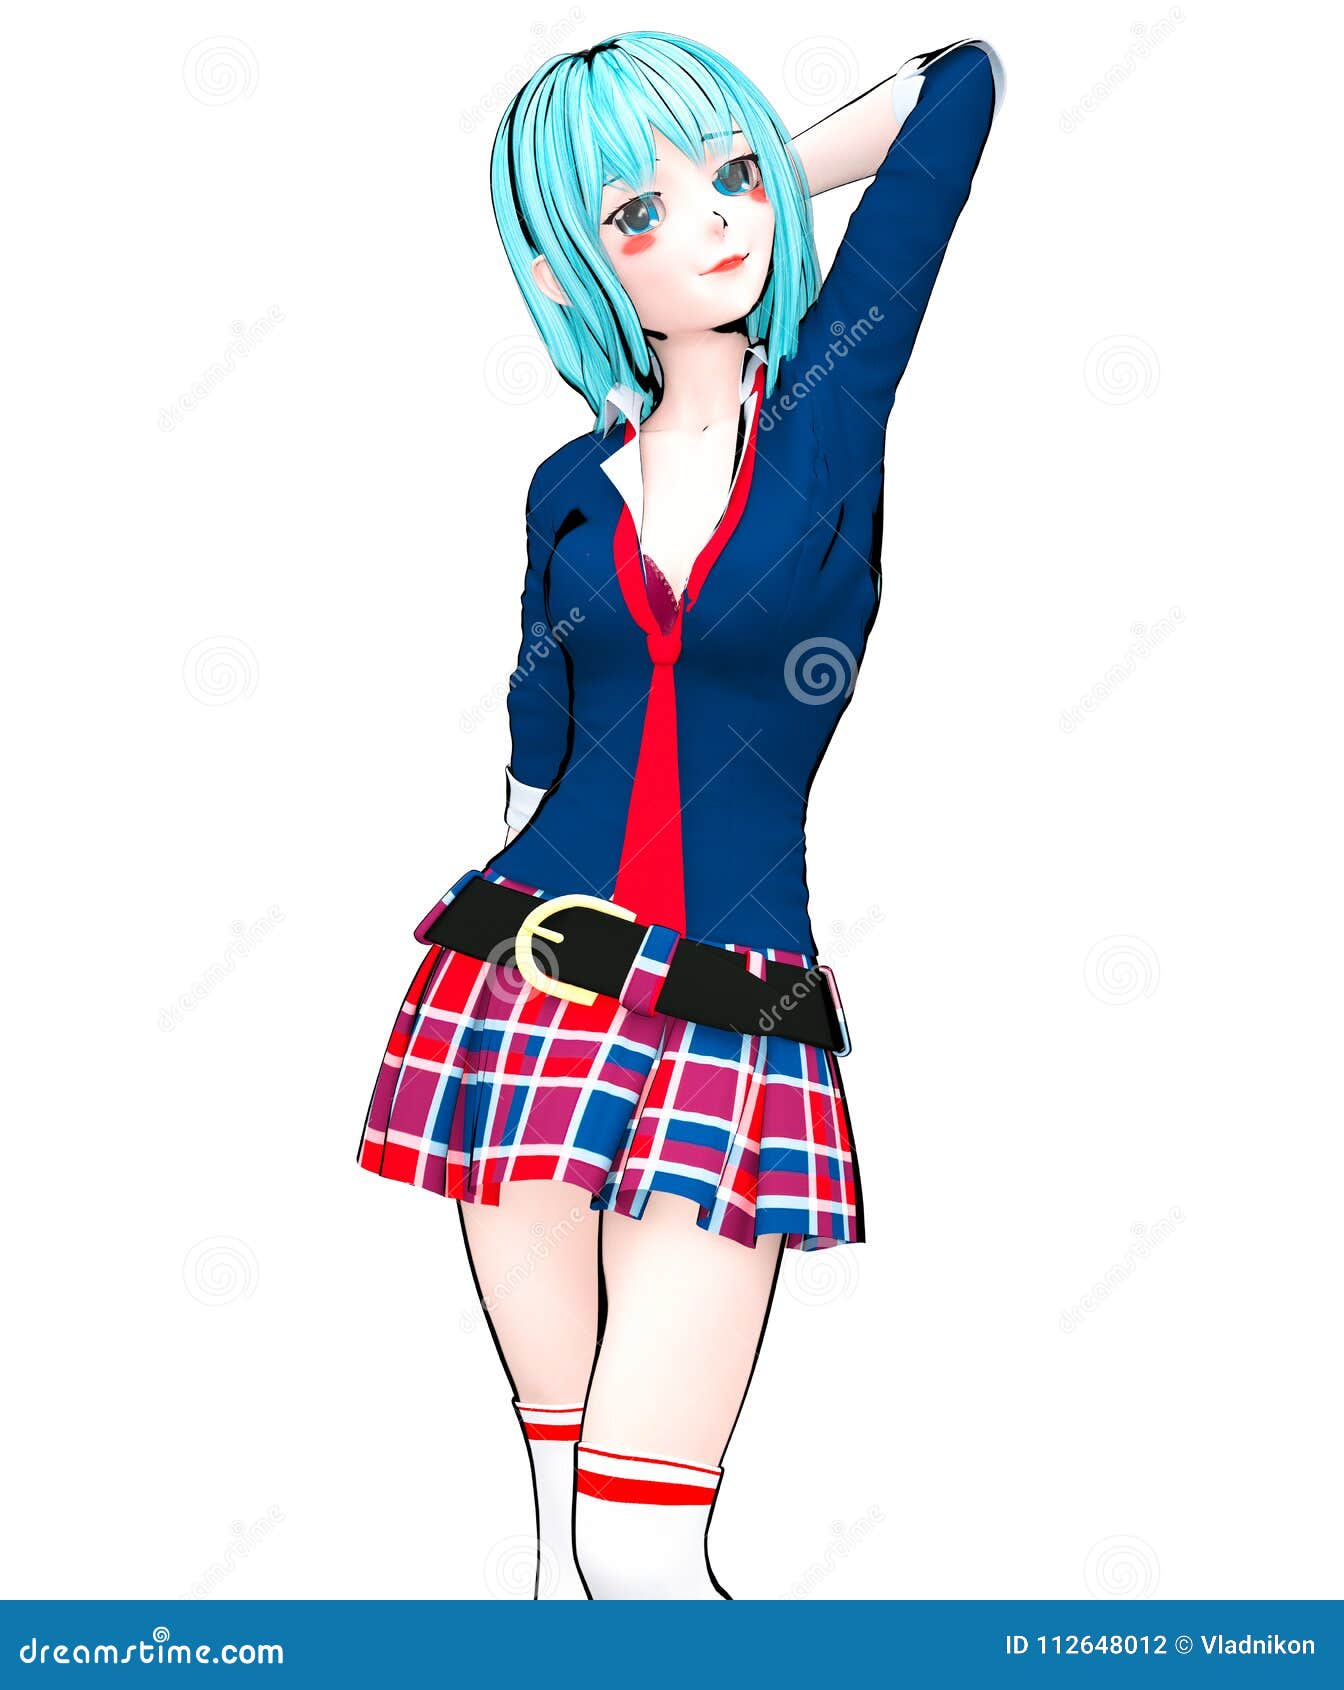 Artificial Girl 3 Character And Clothes Downloads